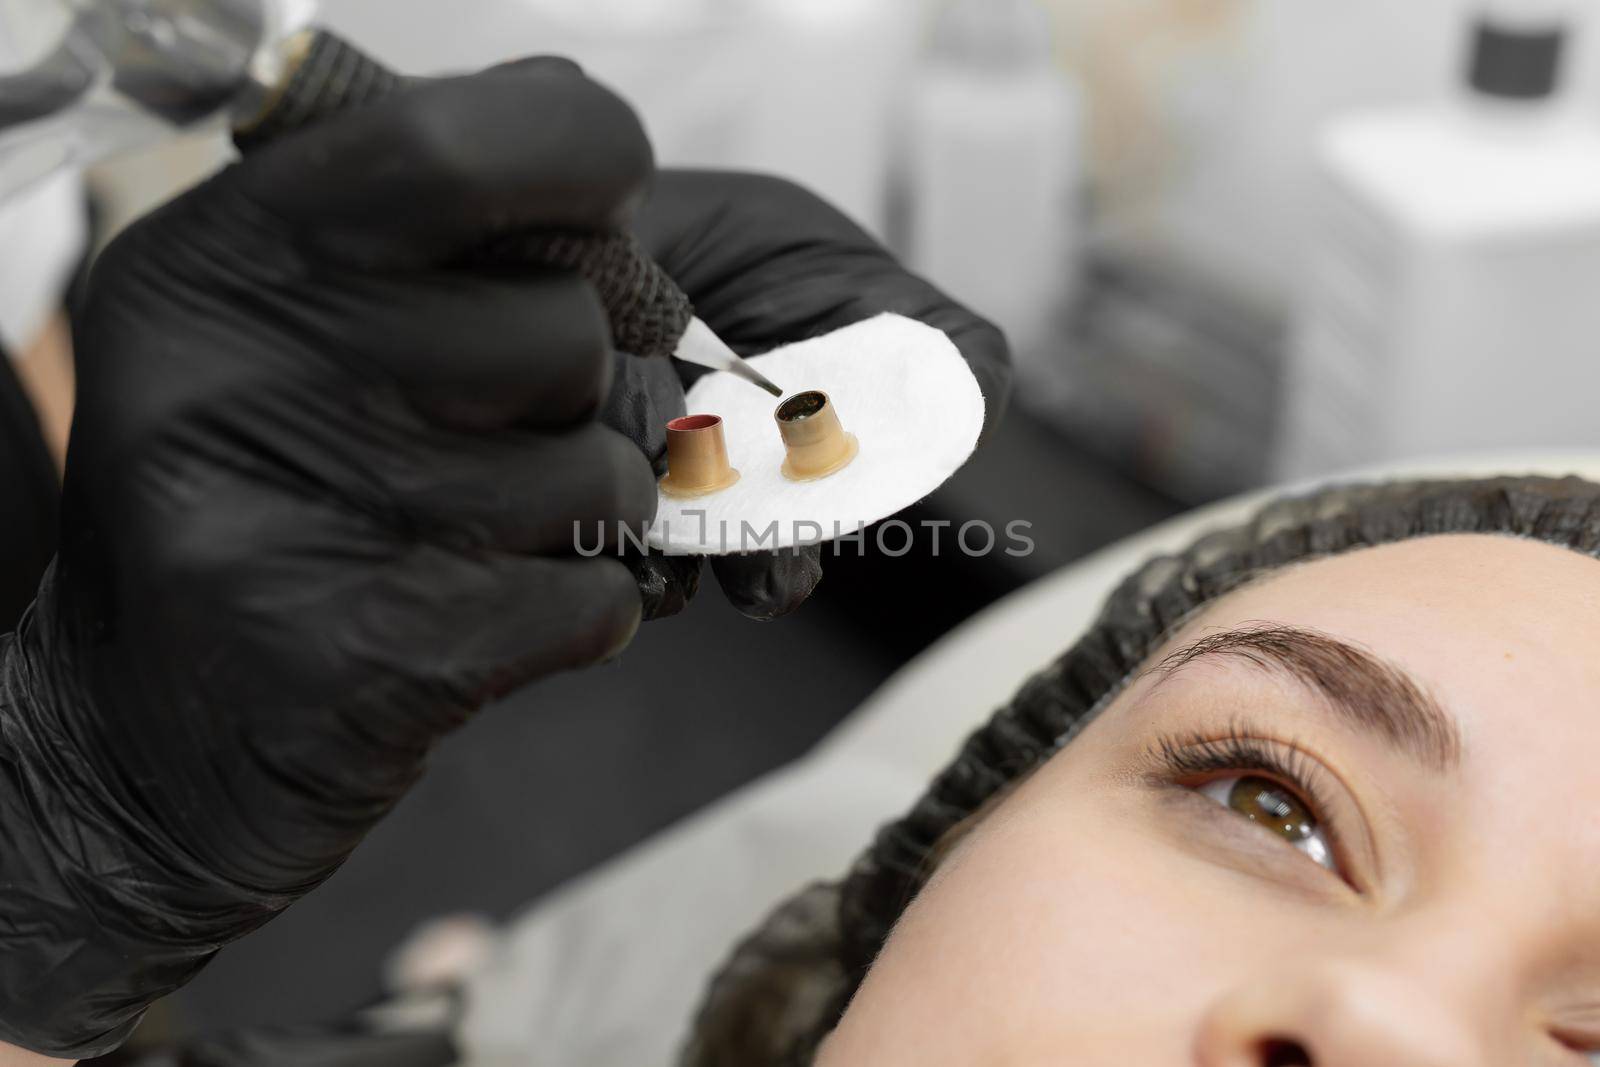 Permanent eyebrow makeup procedure, eyebrow tattooing. The master types paint in the tattoo machine by StudioPeace